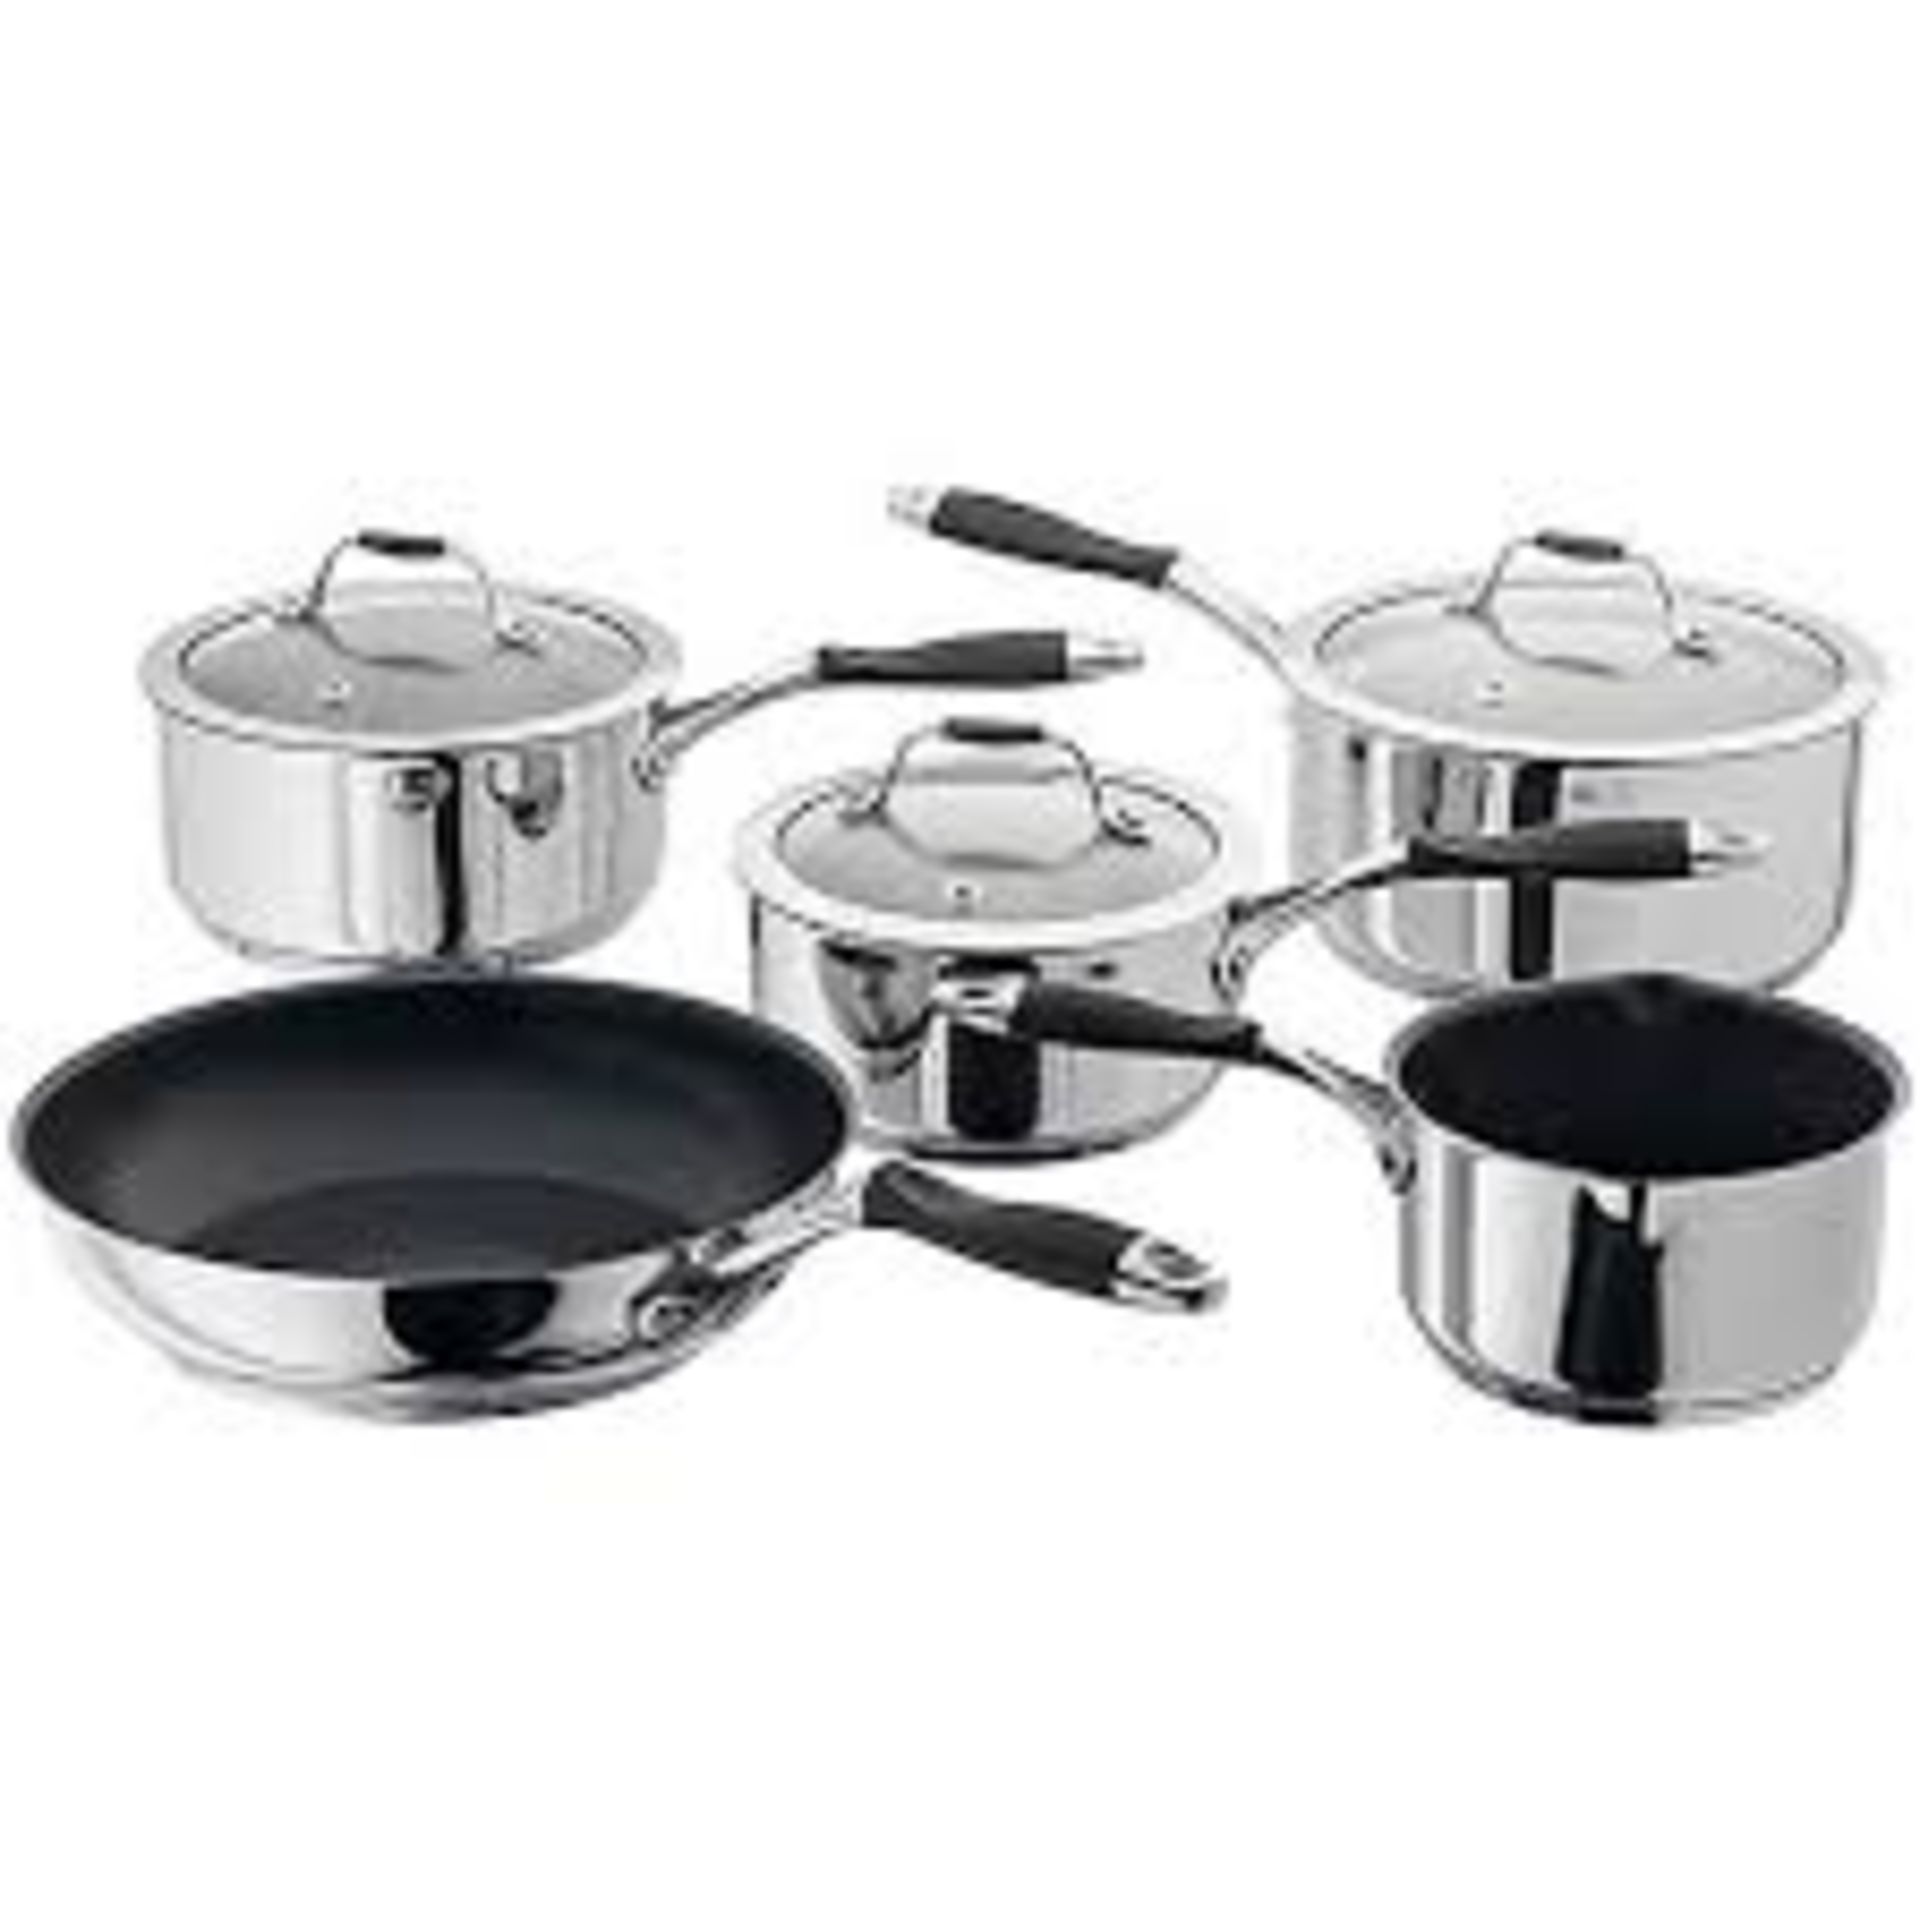 BOXED SETS OF URBNCHEF 5 PIECE STAINLESS STEEL PAN SETS. EACH SET INCLUDES: 16CM SAUCE PAN WITH - Image 2 of 2